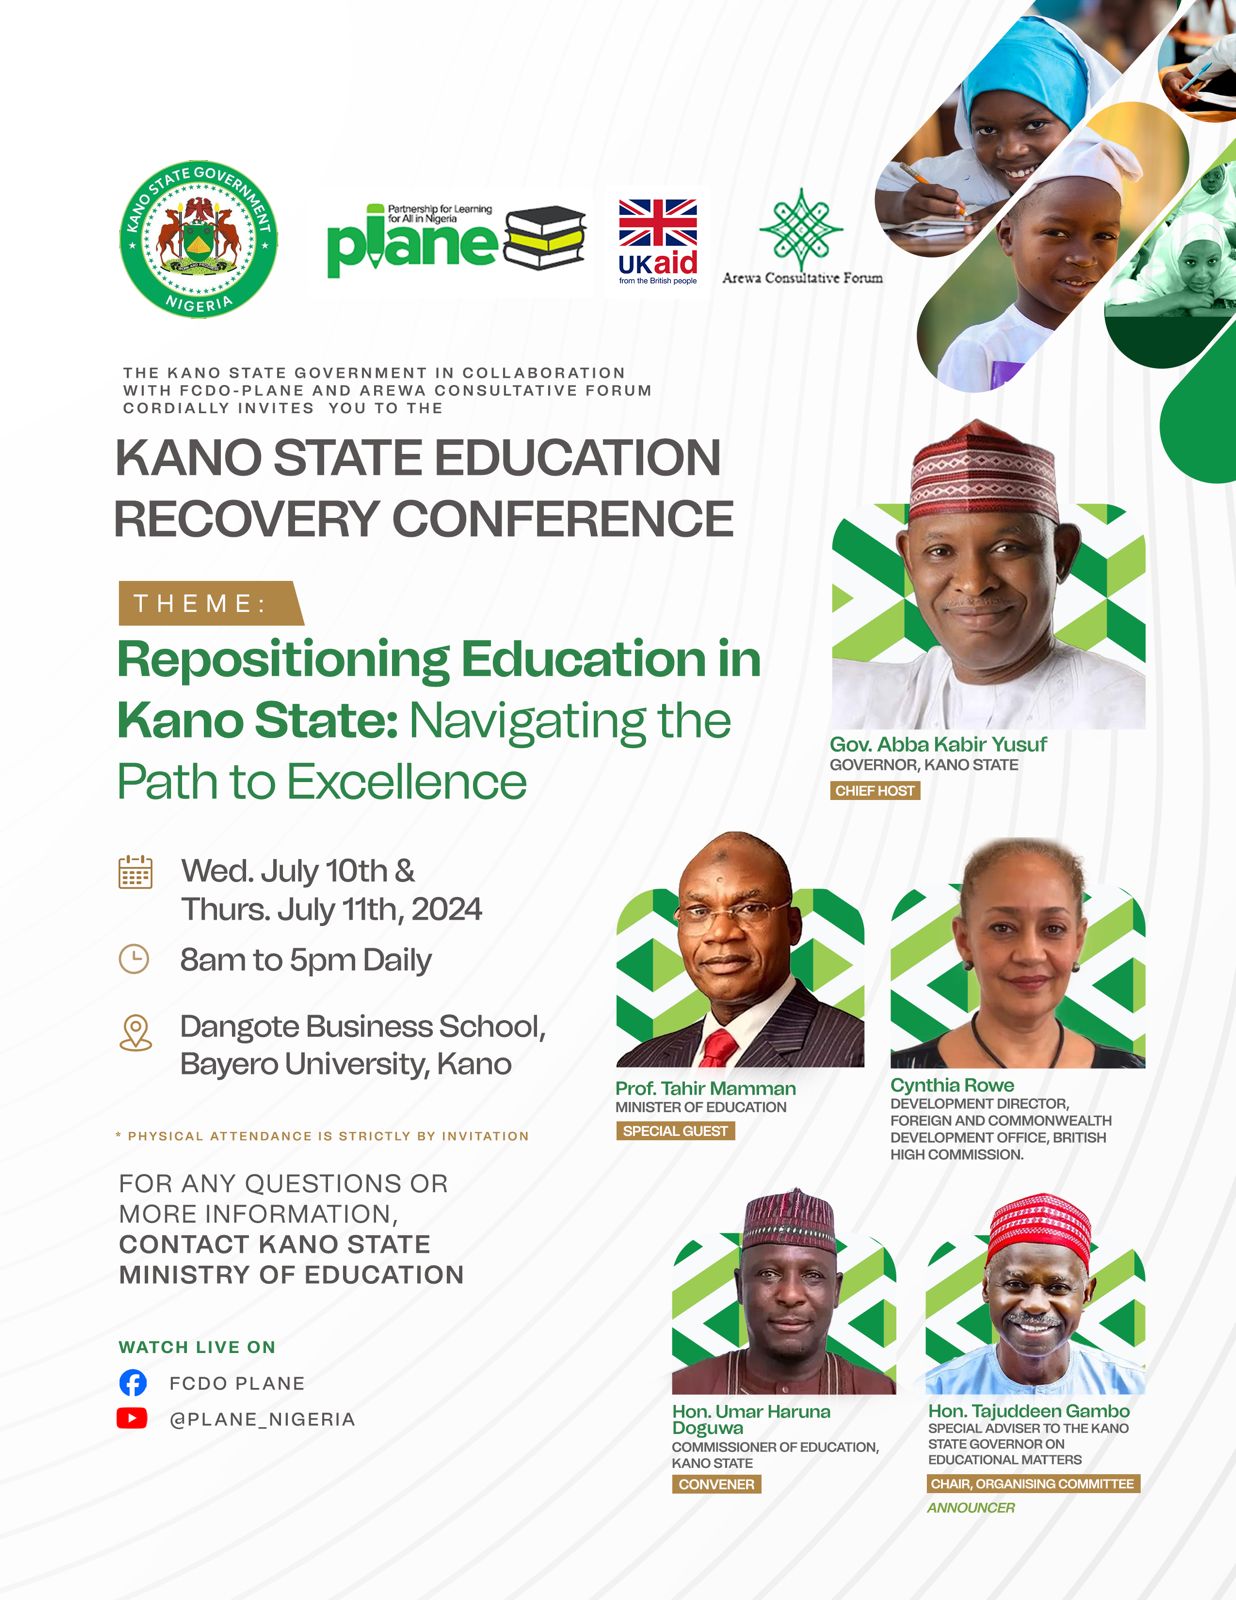 KANO STATE SET TO HOST MAJOR EDUCATION RECOVERY CONFERENCE